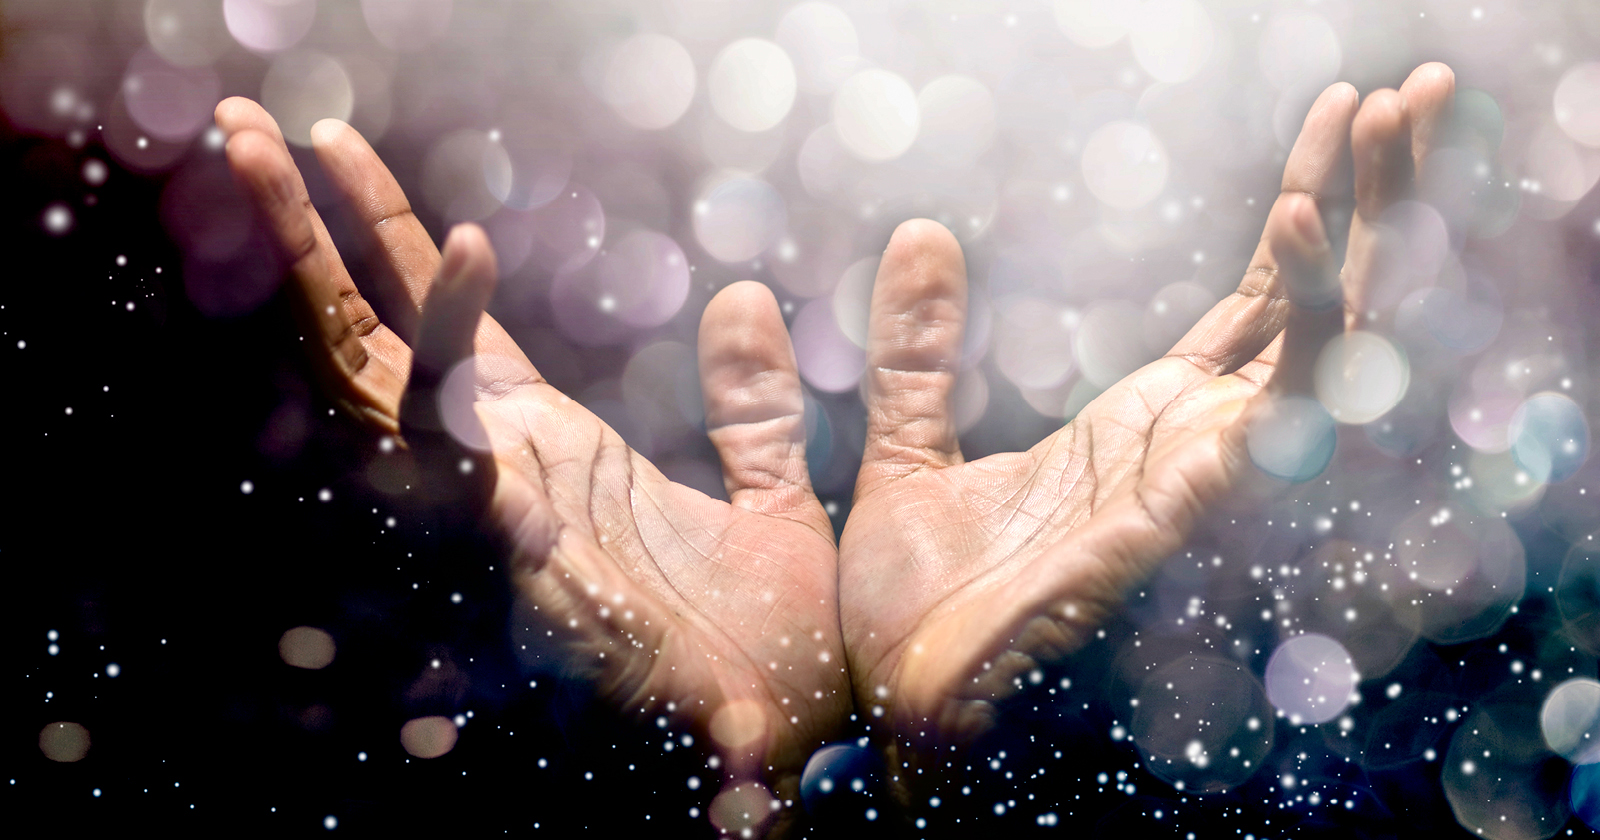  Picture of two hands reaching towards starlight falling.